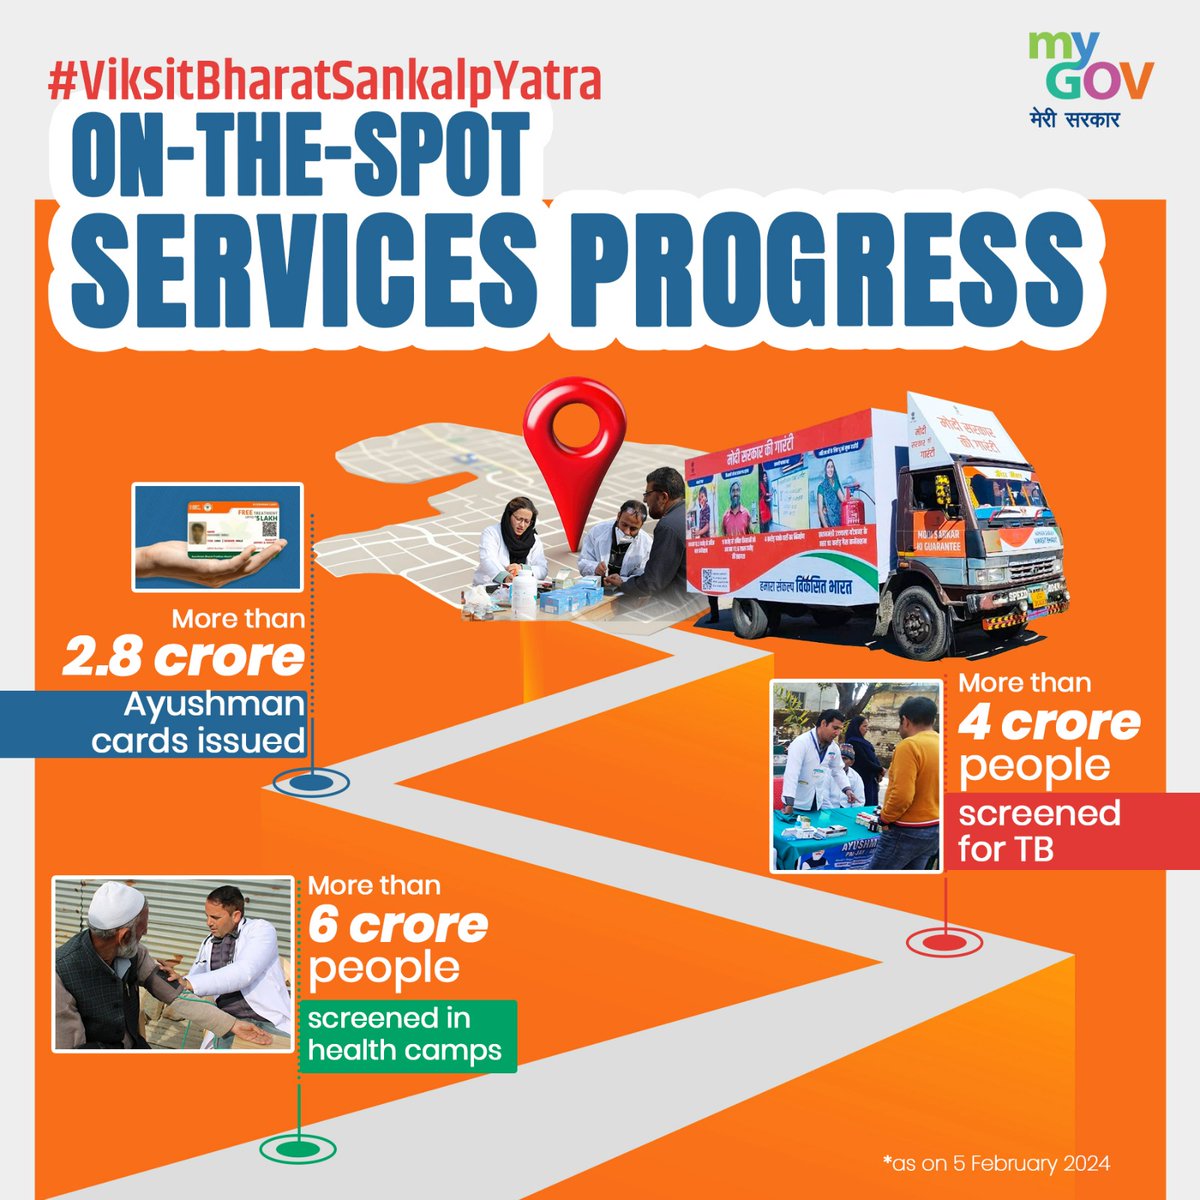 Witness the wave of Janbhagidari with #ViksitBharatSankalpYatra! 

Citizens are enthusiastically availing themselves of on-the-spot Modi government schemes.

Join the #HamaraSankalpViksitBharat movement and contribute to a healthier, empowered Bharat!